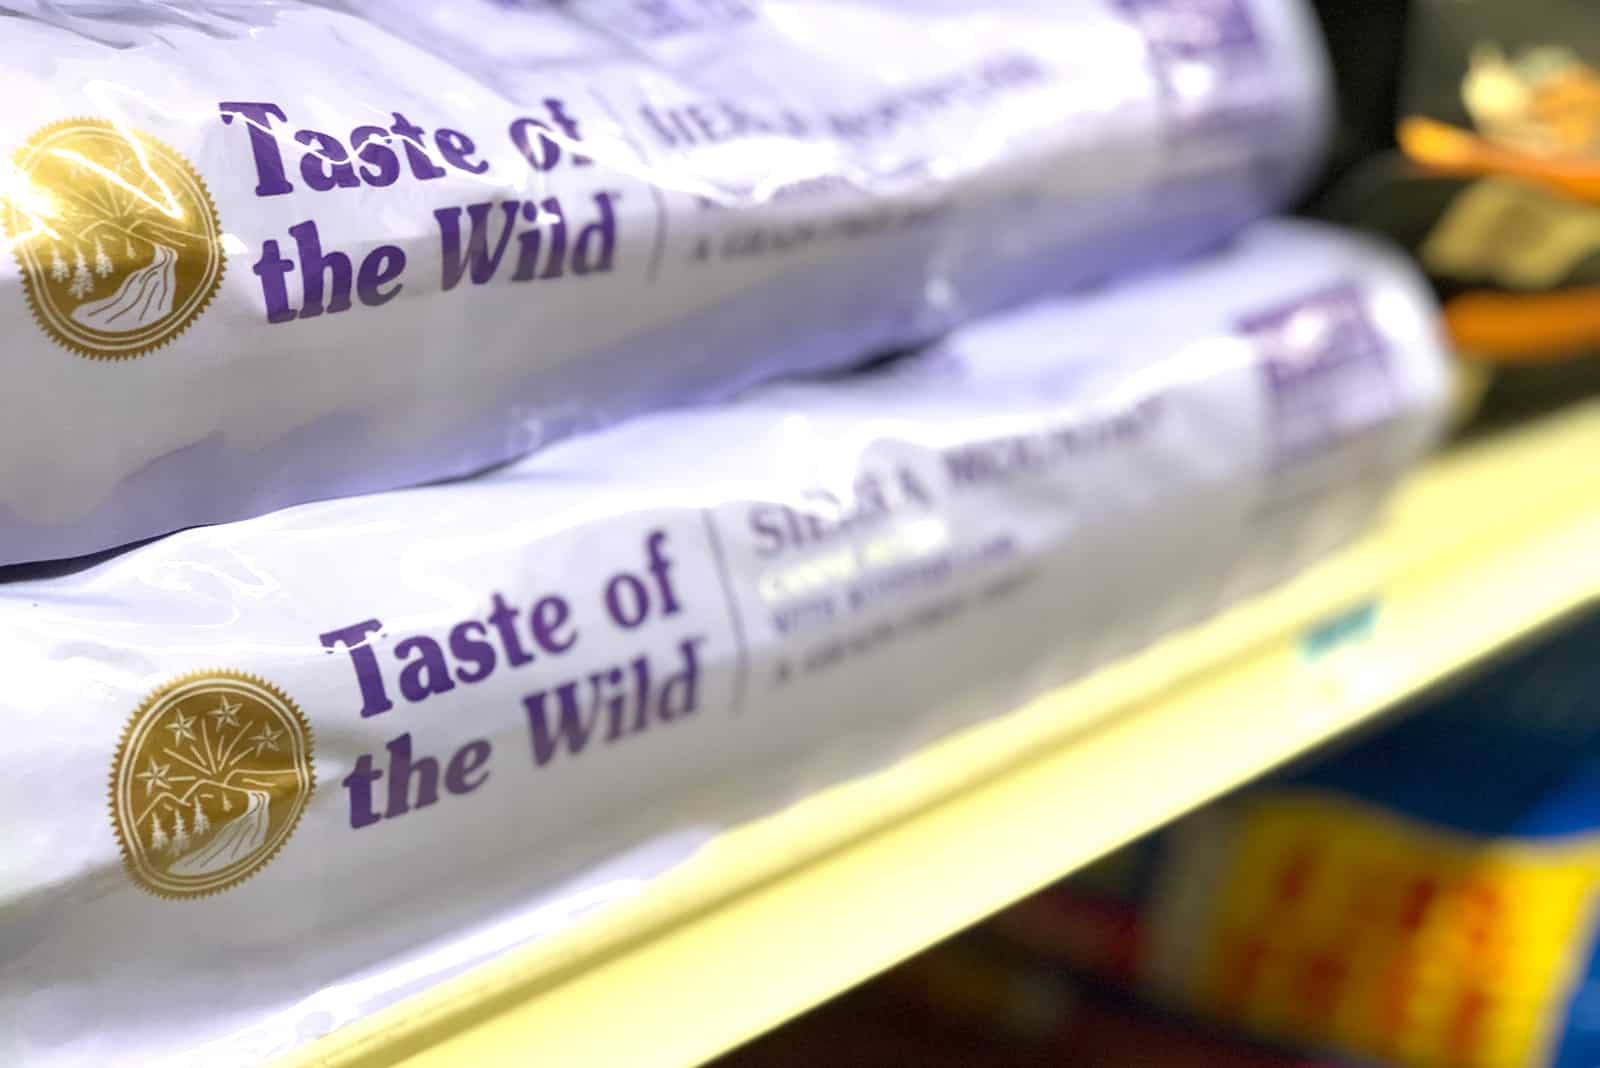 Taste of the Wild brand dog food in bags